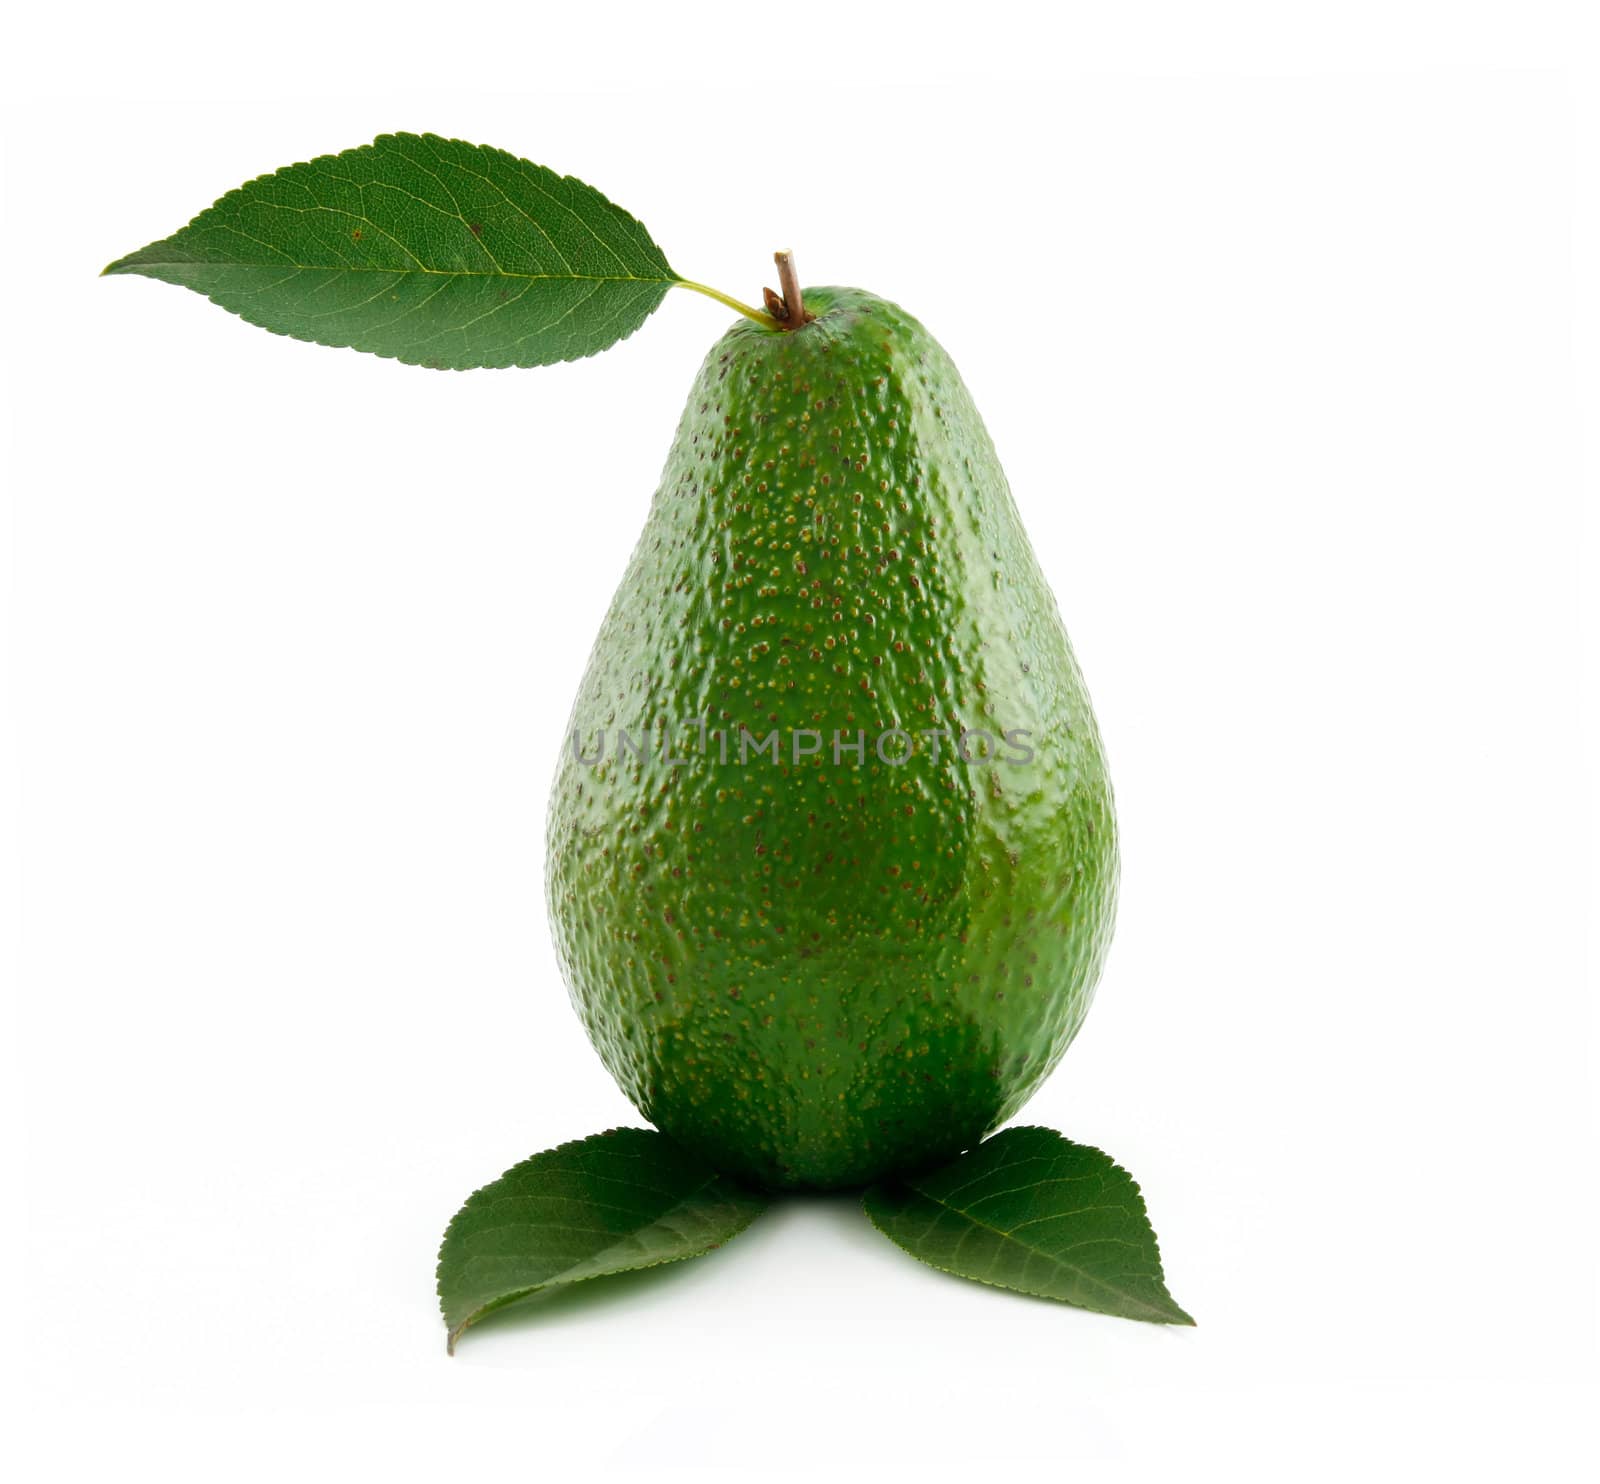 Ripe Avocado With Green Leaf Isolated on White Background